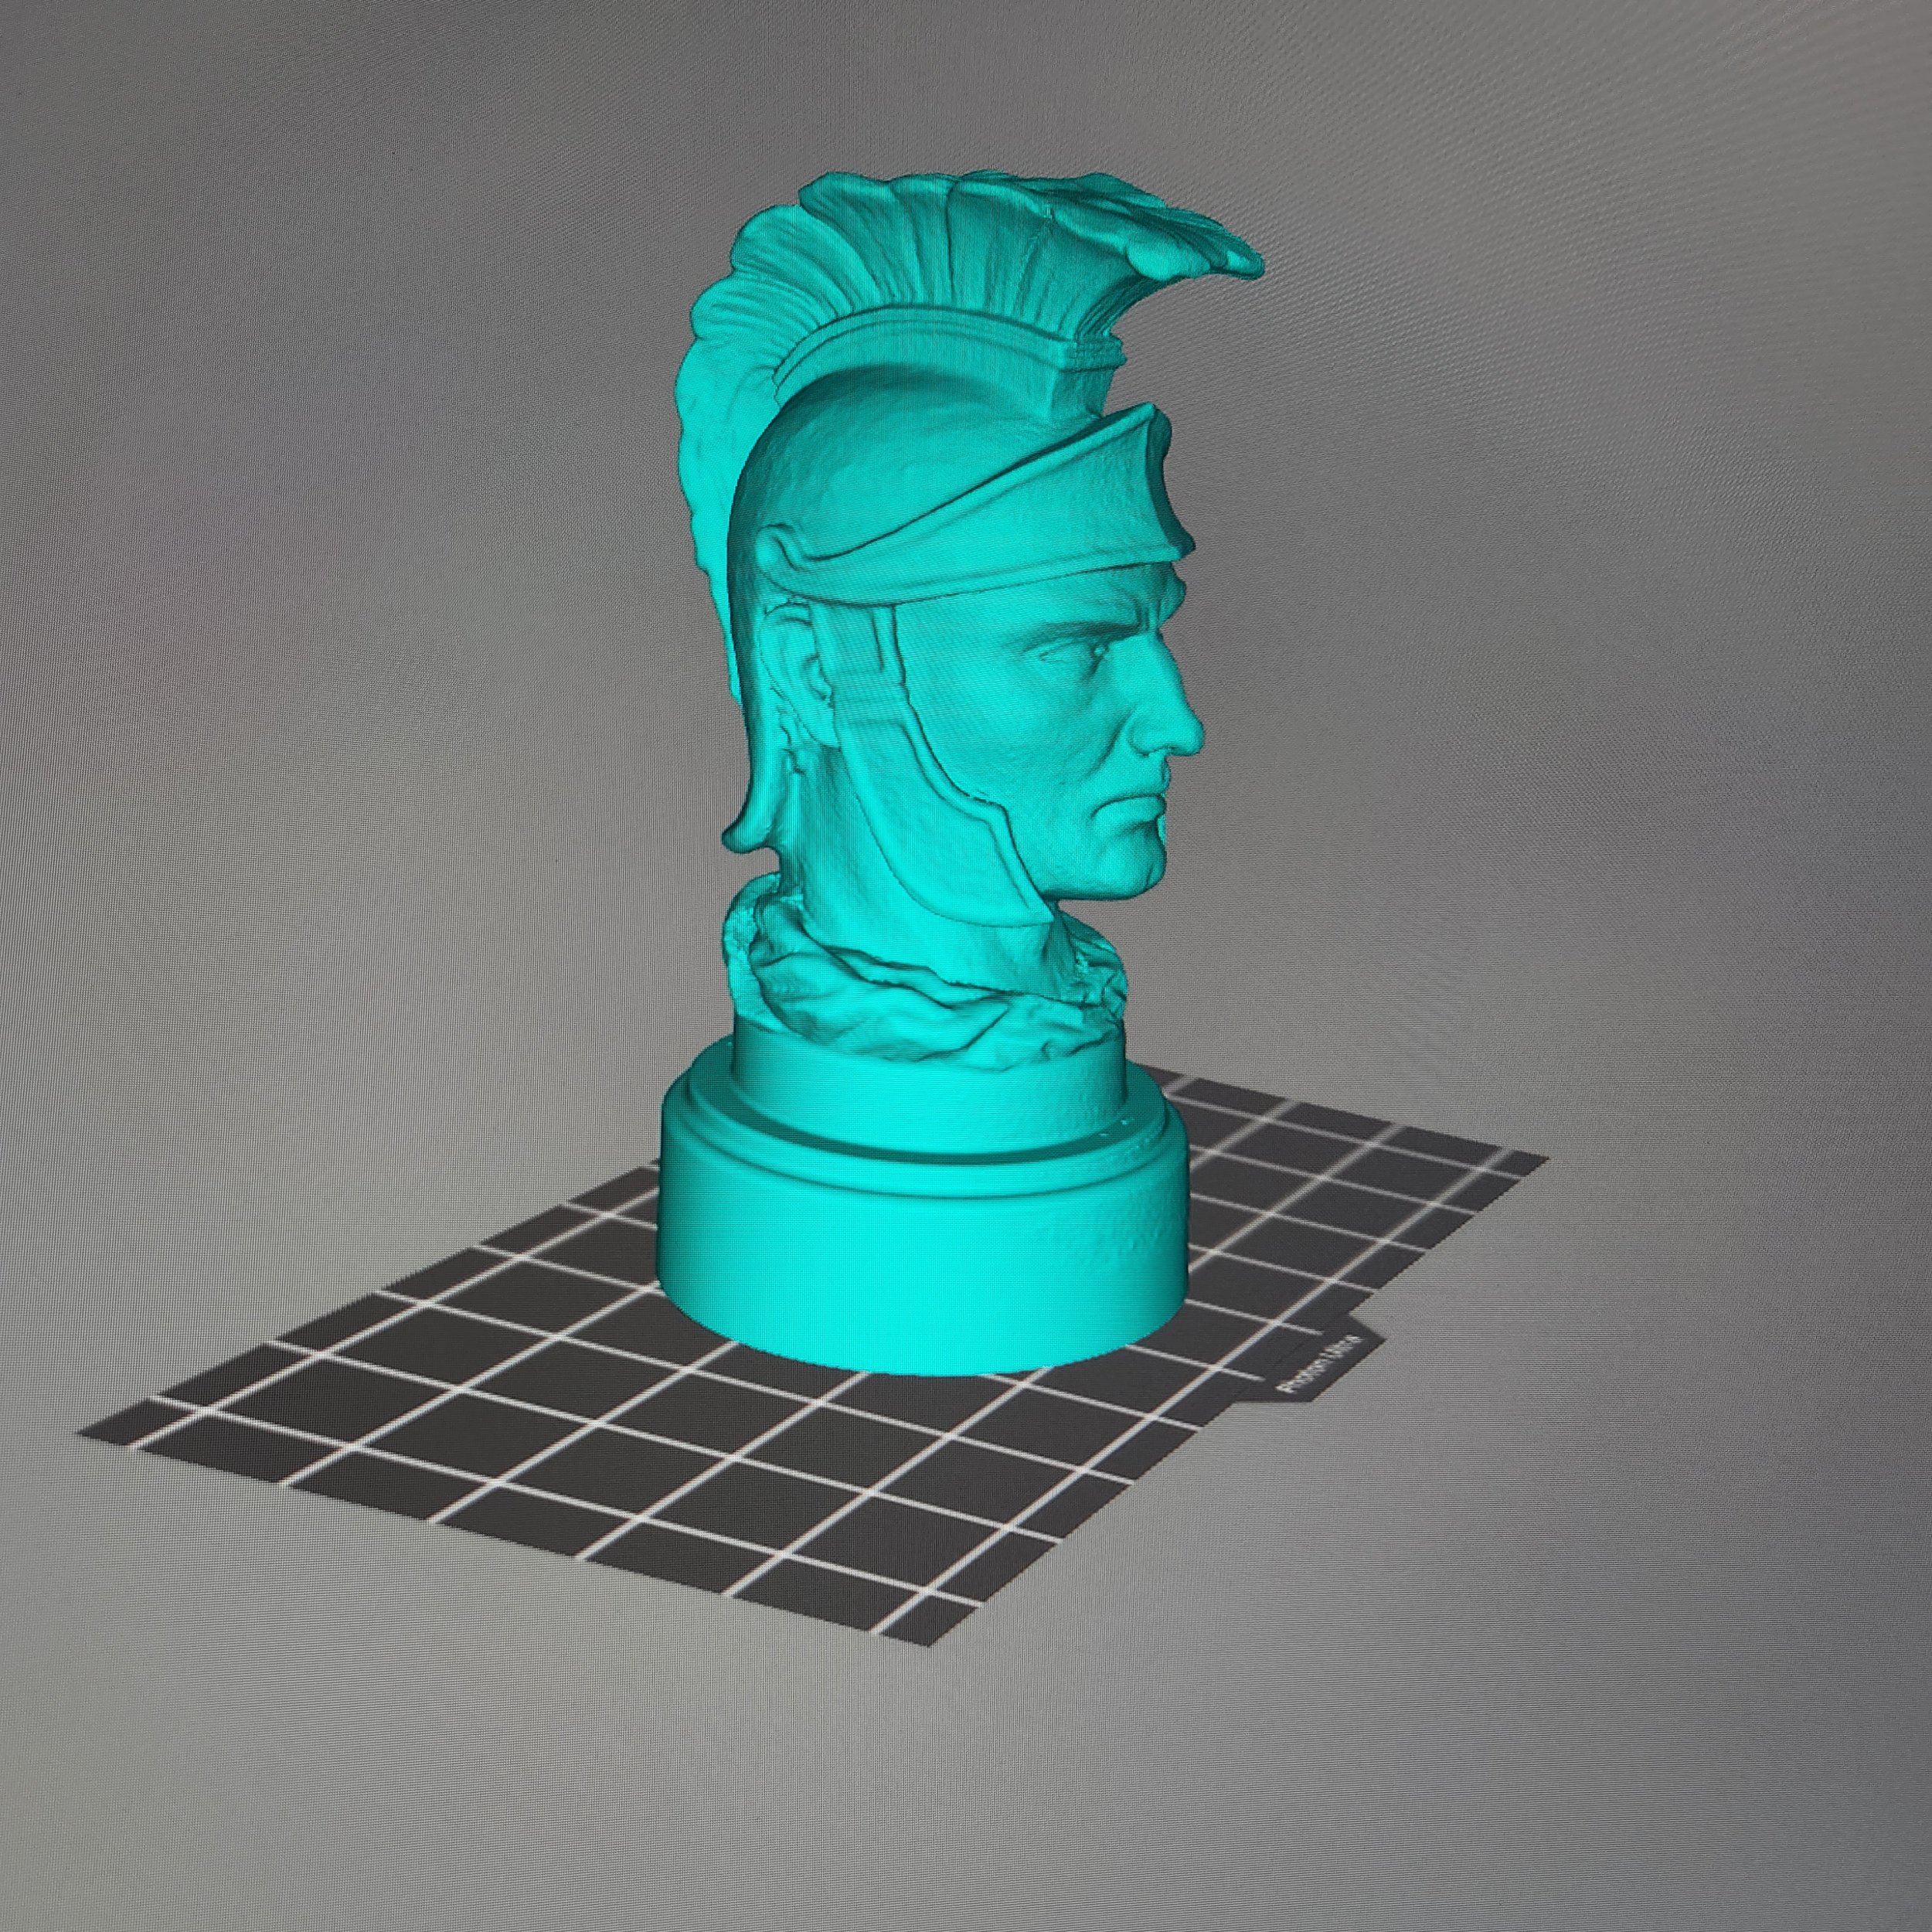 3D scanning and printing